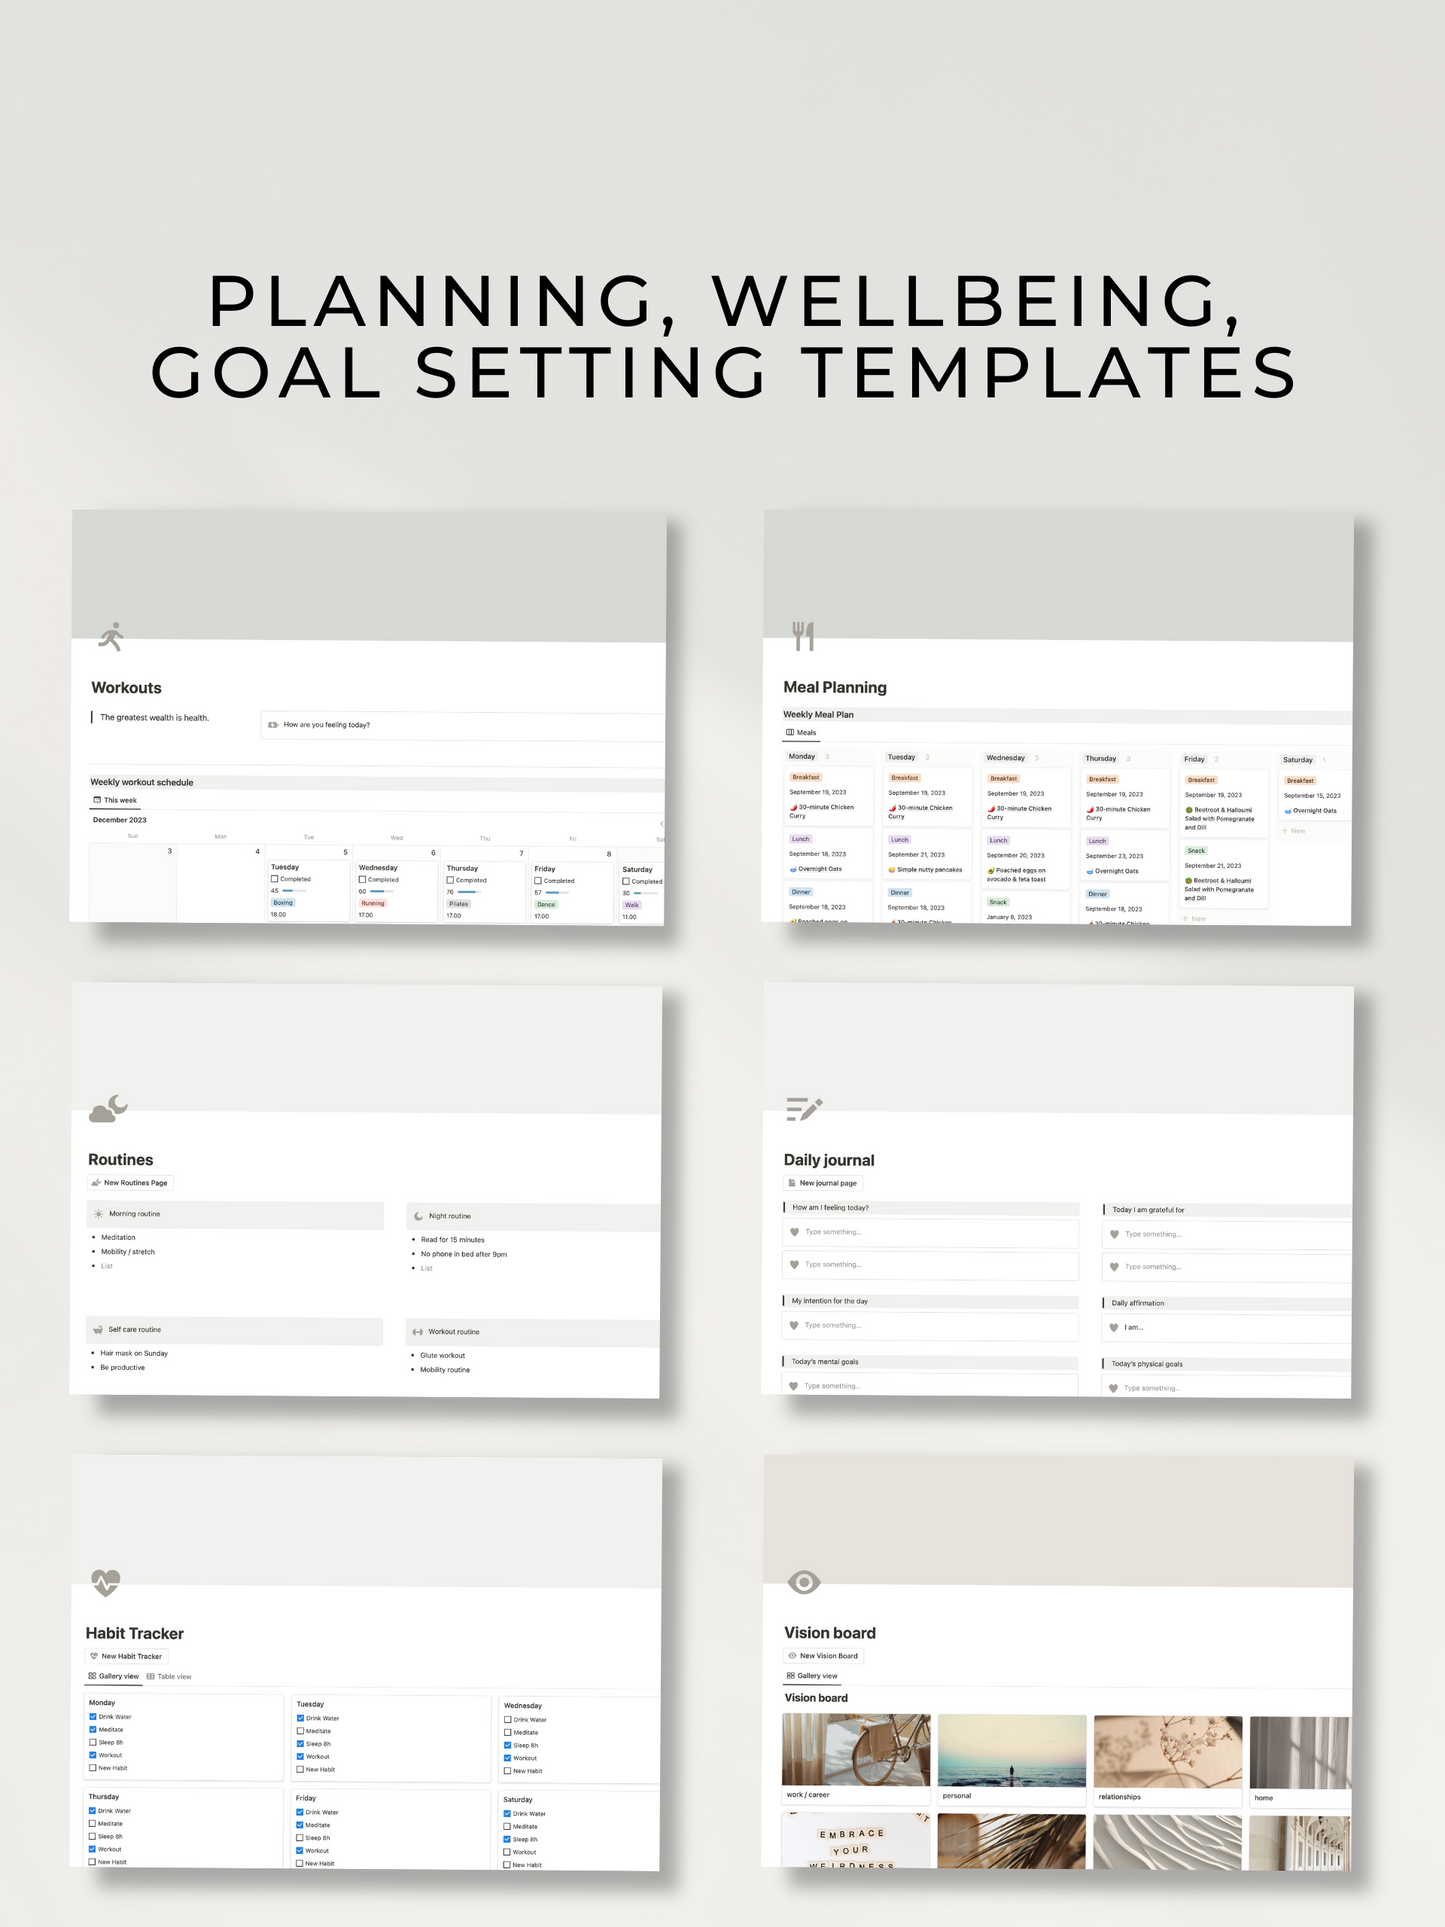 2024 PLANNER FOR NOTION | TEMPLATE MADE FOR NOTION